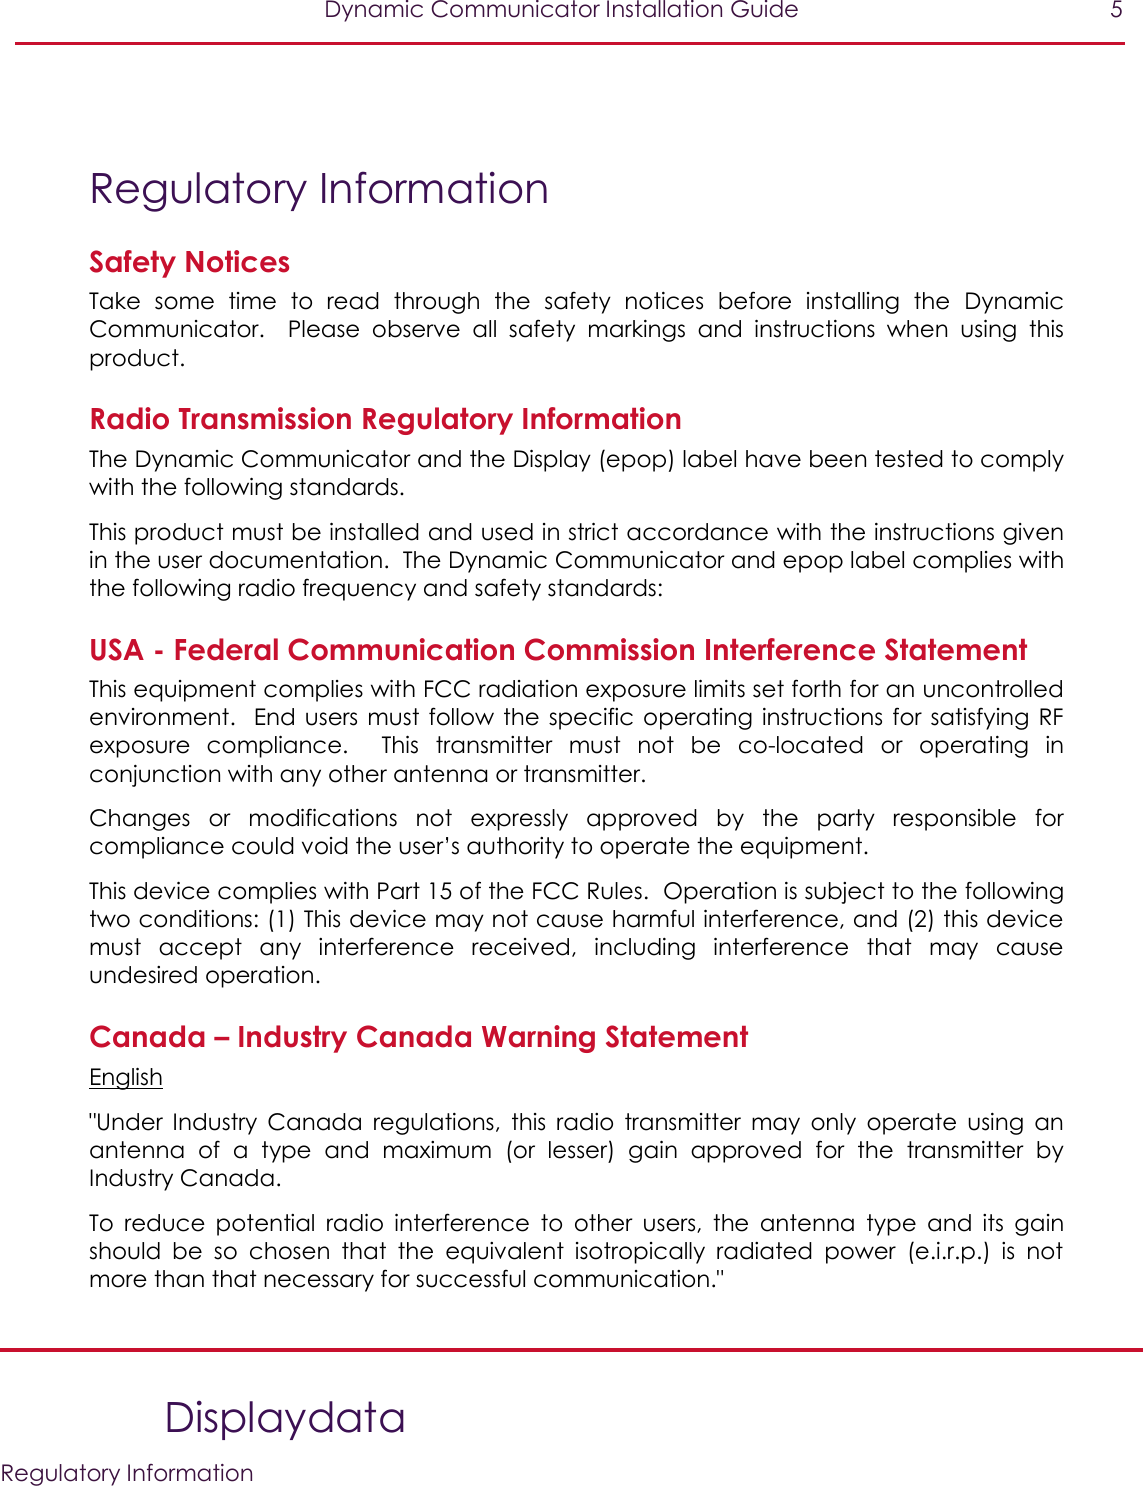   Dynamic Communicator Installation Guide  5    Displaydata   Regulatory Information  Regulatory Information Safety Notices Take  some  time  to  read  through  the  safety  notices  before  installing  the  Dynamic Communicator.    Please  observe  all  safety  markings  and  instructions  when  using  this product. Radio Transmission Regulatory Information The Dynamic Communicator and the Display (epop) label have been tested to comply with the following standards. This product must be installed and used in strict accordance with the instructions given in the user documentation.  The Dynamic Communicator and epop label complies with the following radio frequency and safety standards: USA - Federal Communication Commission Interference Statement This equipment complies with FCC radiation exposure limits set forth for an uncontrolled environment.  End users must follow  the specific operating instructions for satisfying RF exposure  compliance.  This  transmitter  must  not  be  co-located  or  operating  in conjunction with any other antenna or transmitter. Changes  or  modifications  not  expressly  approved  by  the  party  responsible  for compliance could void the user’s authority to operate the equipment. This device complies with Part 15 of the FCC Rules.  Operation is subject to the following two conditions: (1) This device may not cause harmful interference, and (2) this device must  accept  any  interference  received,  including  interference  that  may  cause undesired operation. Canada – Industry Canada Warning Statement English &quot;Under  Industry  Canada  regulations,  this  radio  transmitter  may  only  operate  using  an antenna  of  a  type  and  maximum  (or  lesser)  gain  approved  for  the  transmitter  by Industry Canada. To  reduce  potential  radio  interference  to  other  users,  the  antenna  type  and  its  gain should  be  so  chosen  that  the  equivalent  isotropically  radiated  power  (e.i.r.p.)  is  not more than that necessary for successful communication.&quot; 